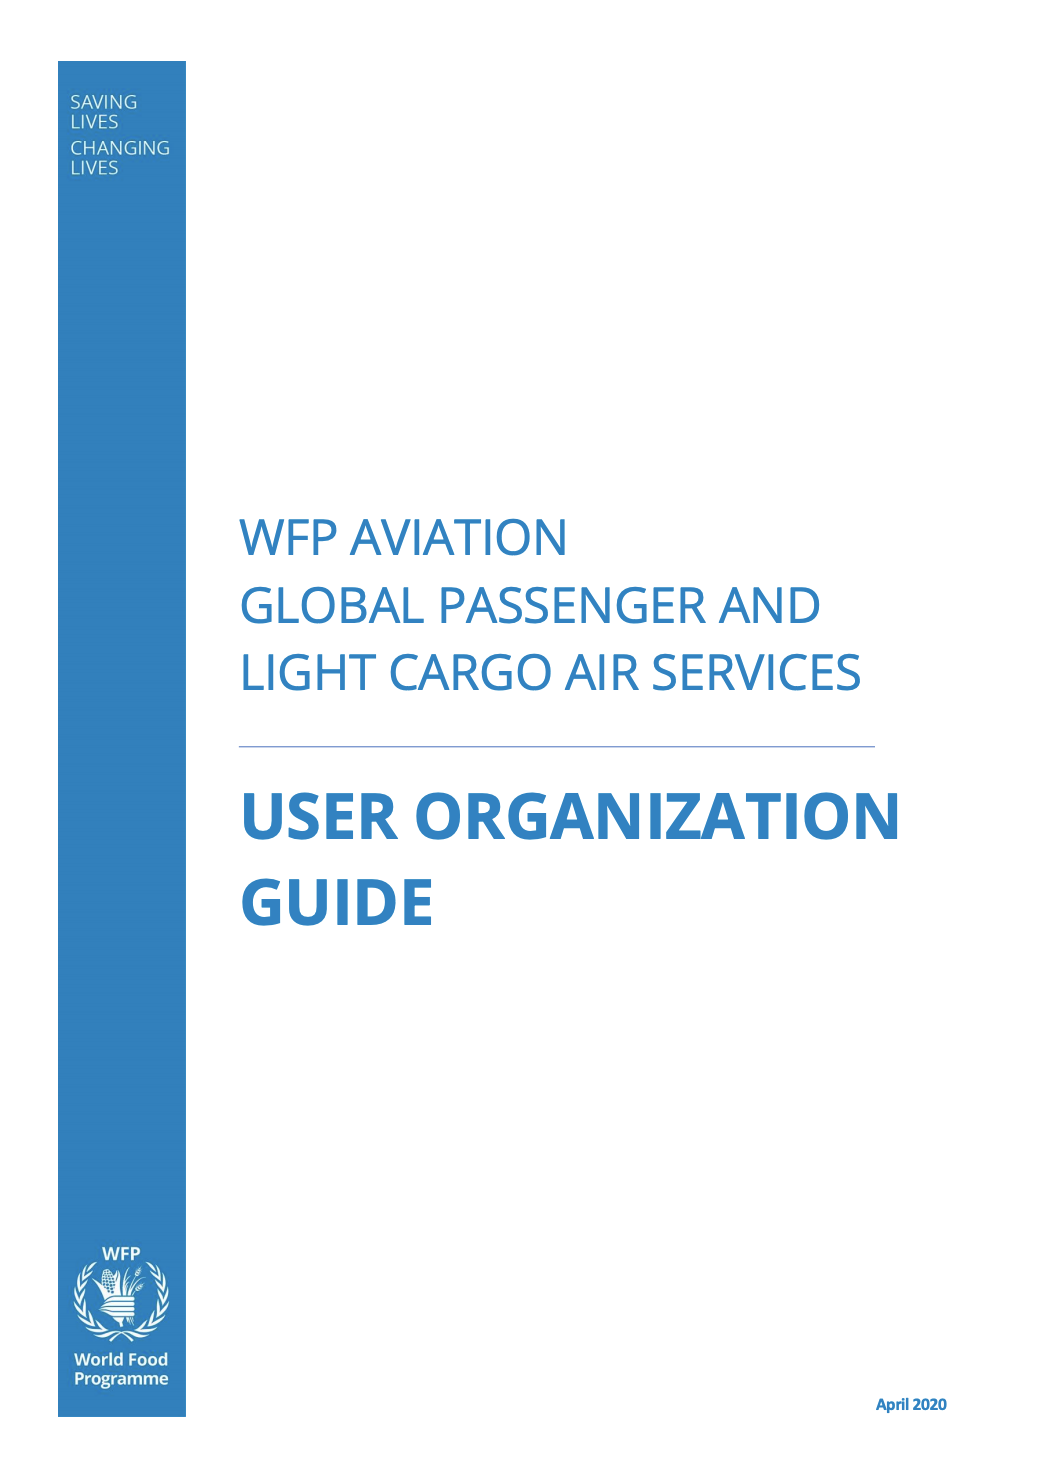 WFP Common Services Plan: Passenger and light cargo air services